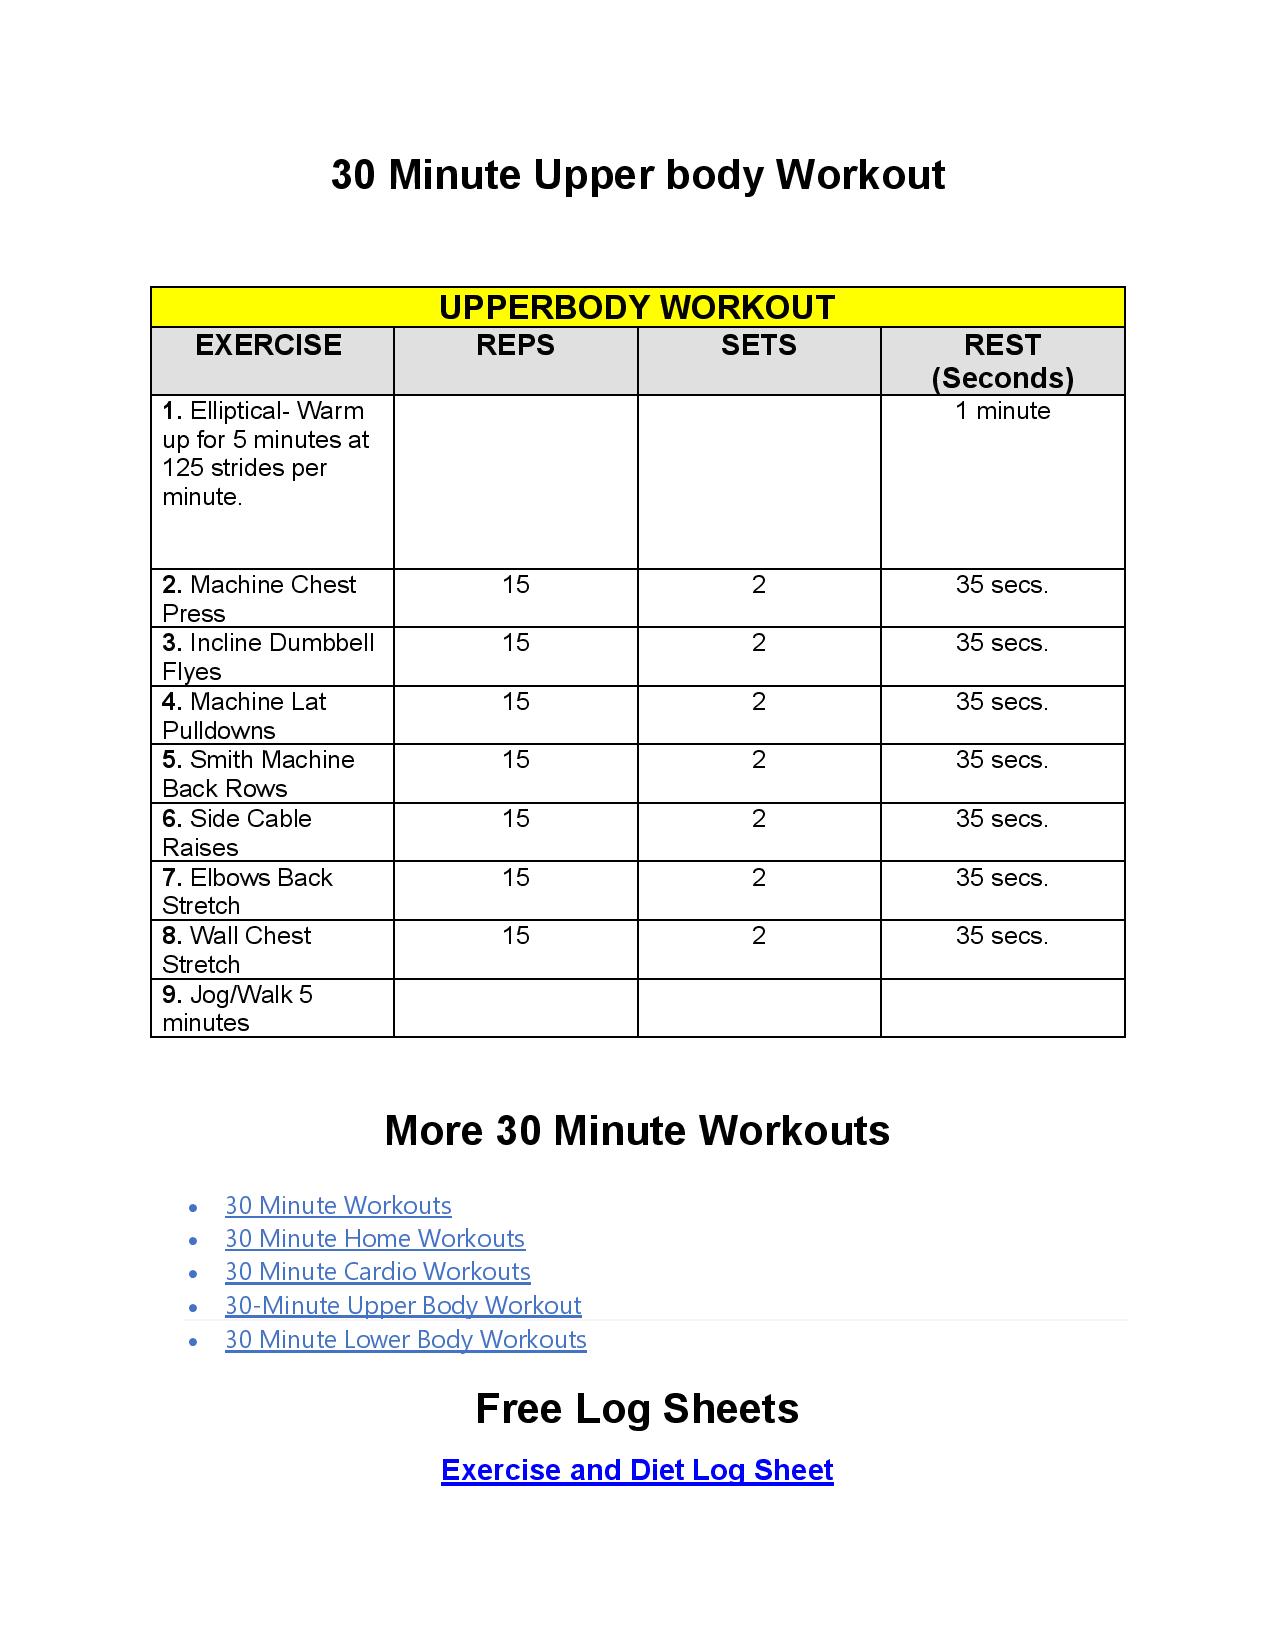 30 minute upper body sample workouts